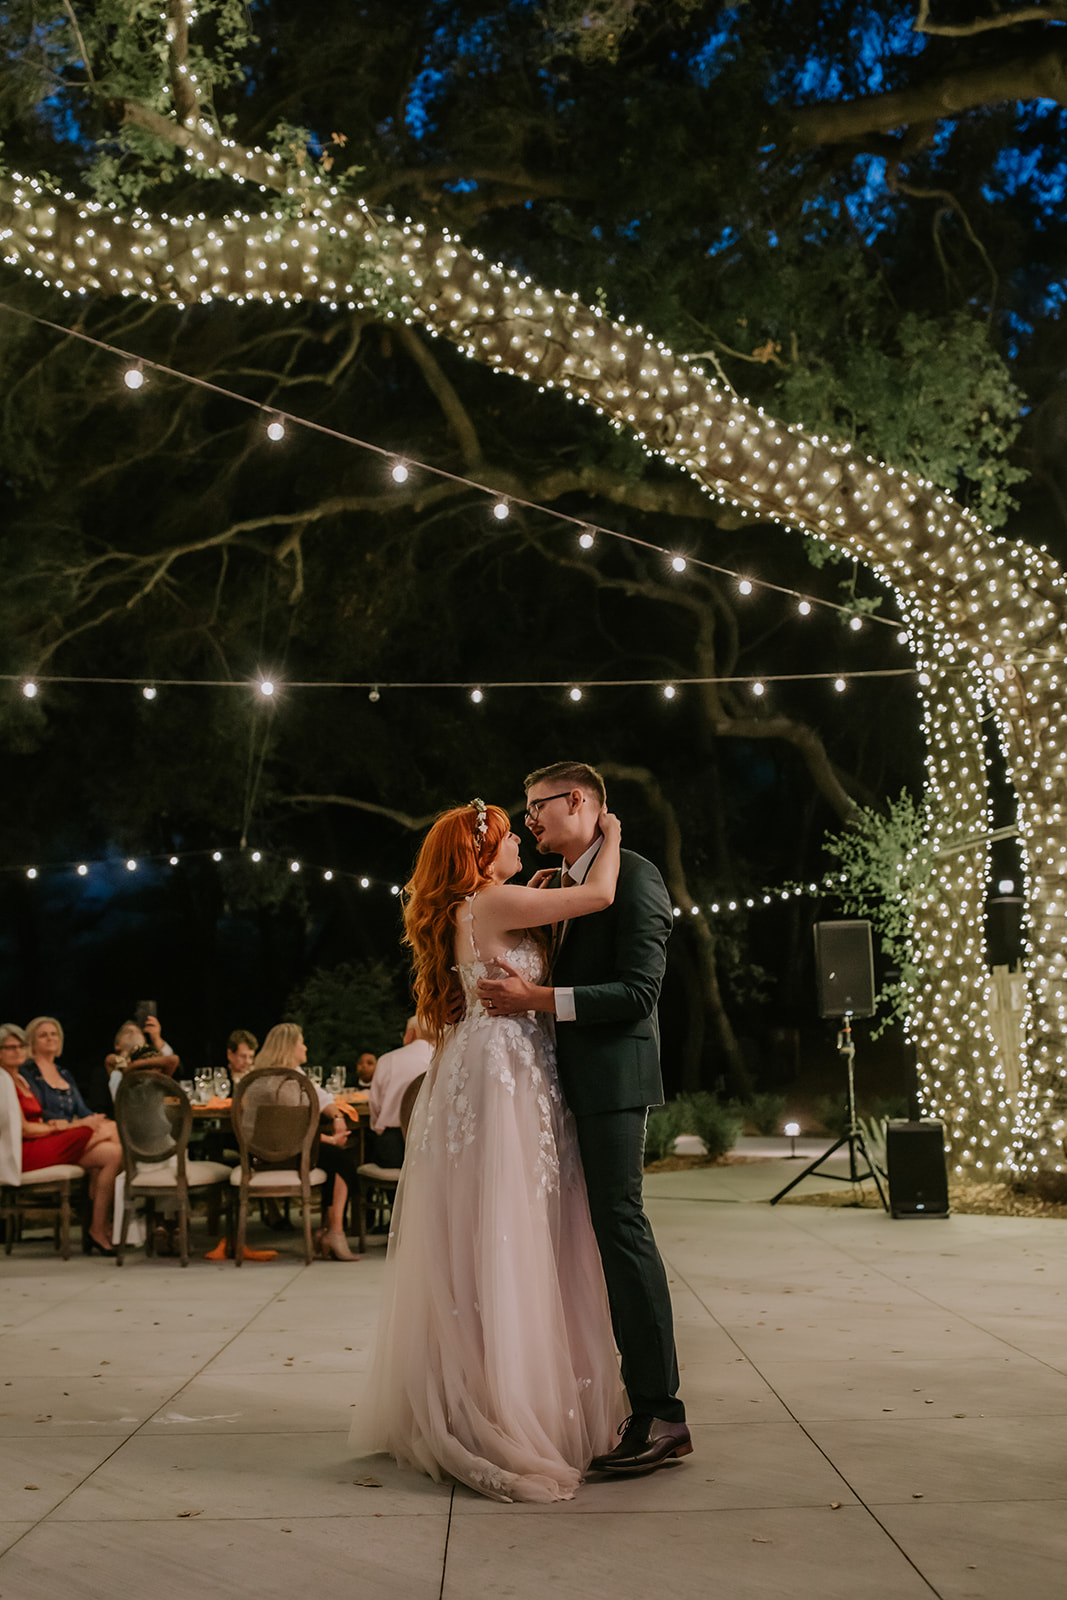 bride and groom sharing their first dance on the patio at the oaks at duncan lane surronded by oak trees wrapped in string lights